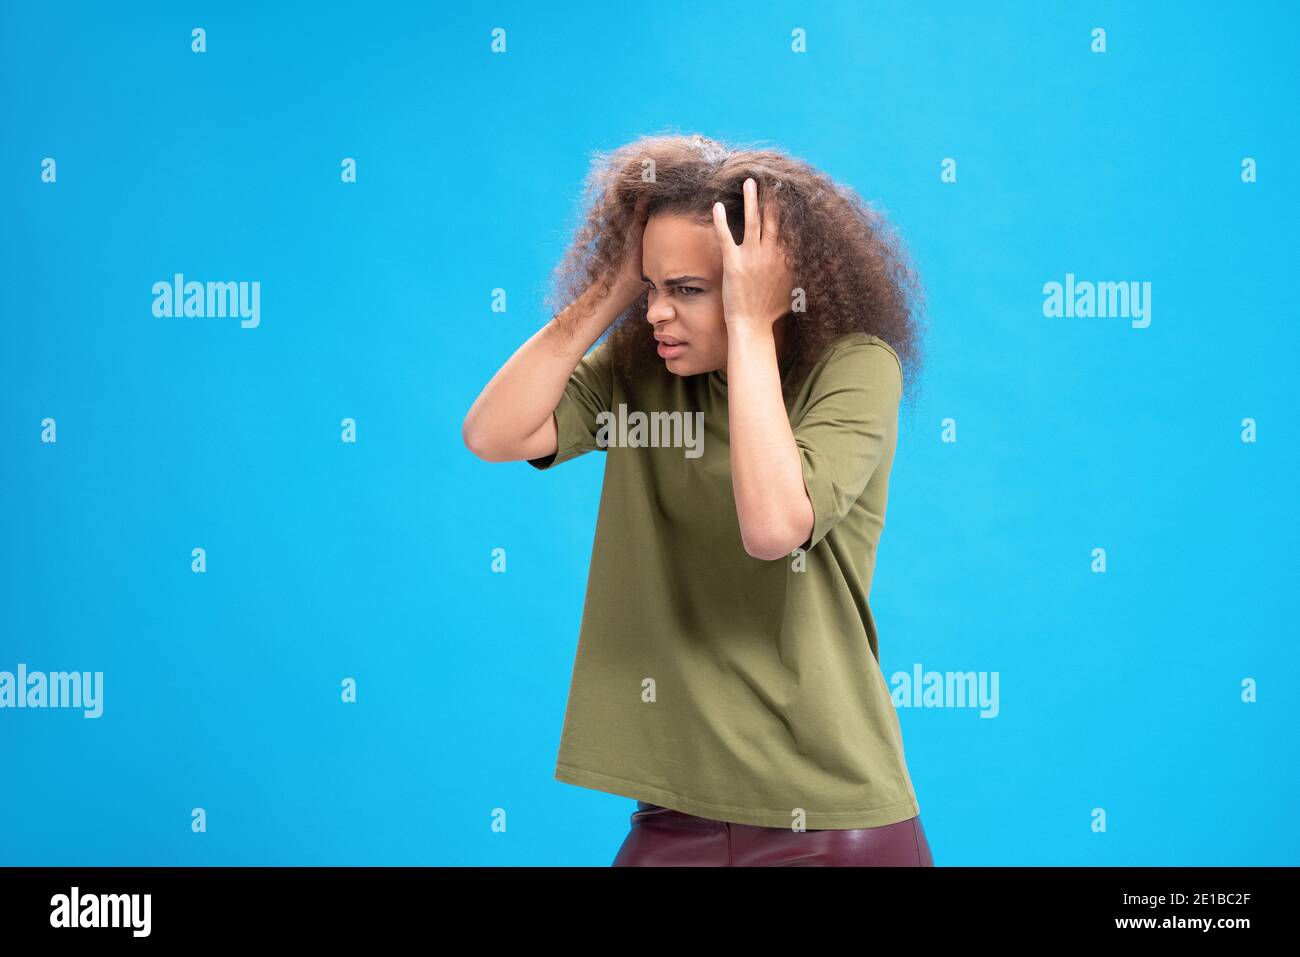 Experiencing migraine or headache African American young woman standing holding head with hands in olive t shirt isolated on blue background. Human Stock Photo